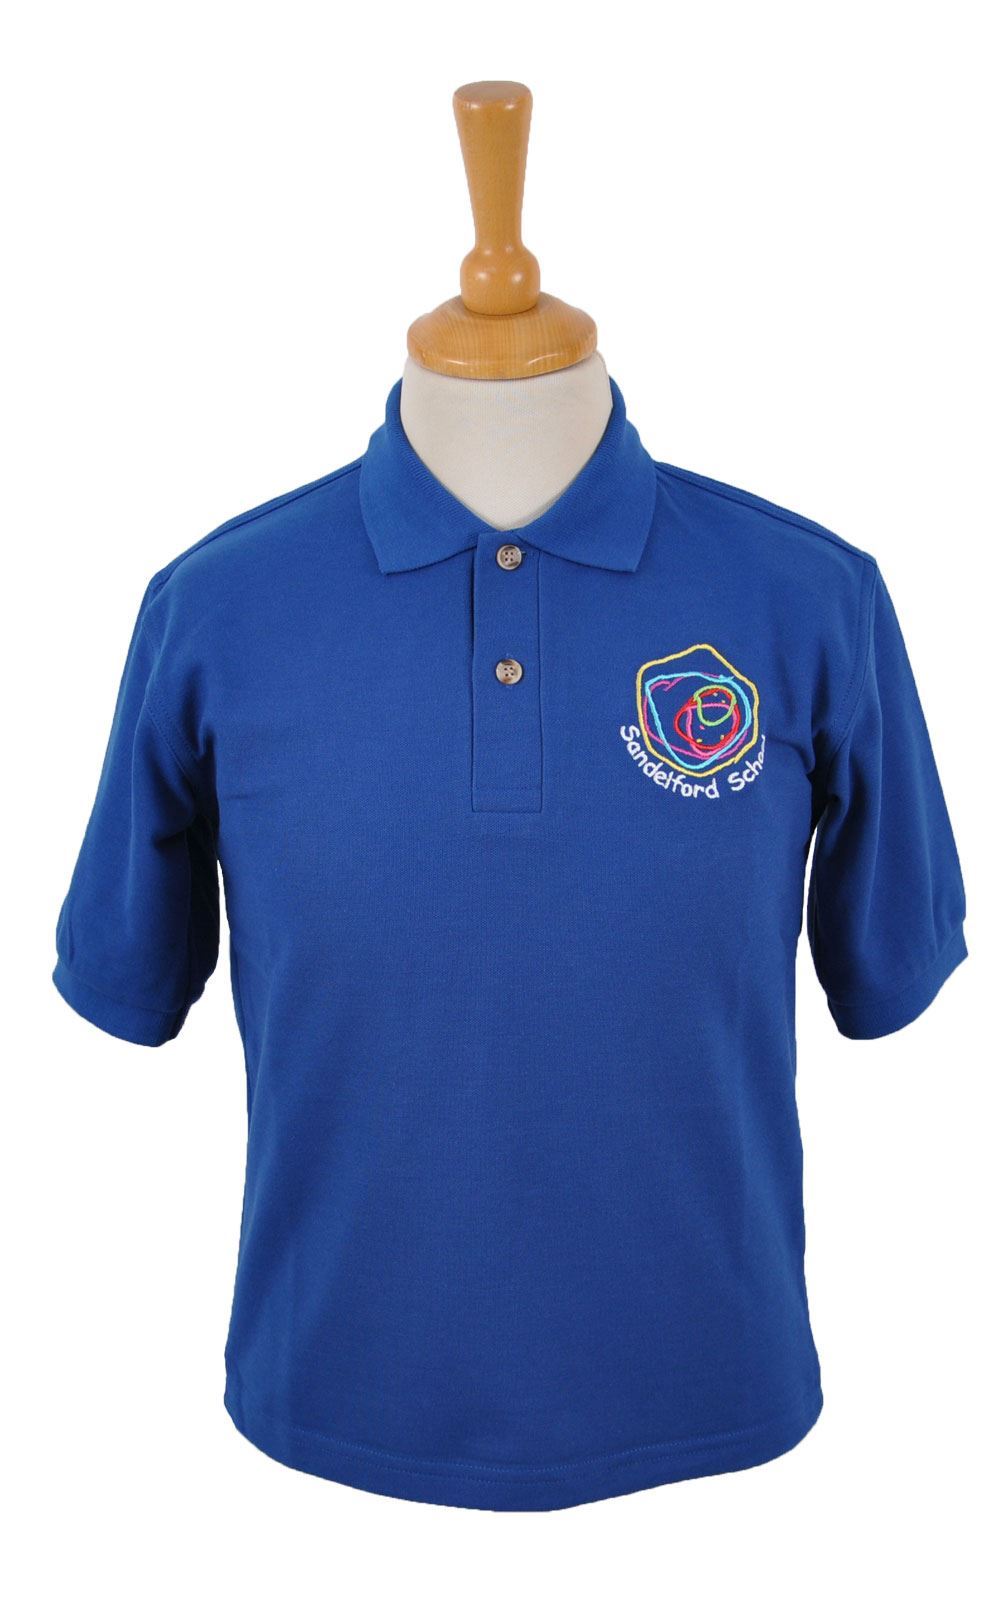 Picture of Sandelford School Dark Royal Polo Shirt - Blue Max